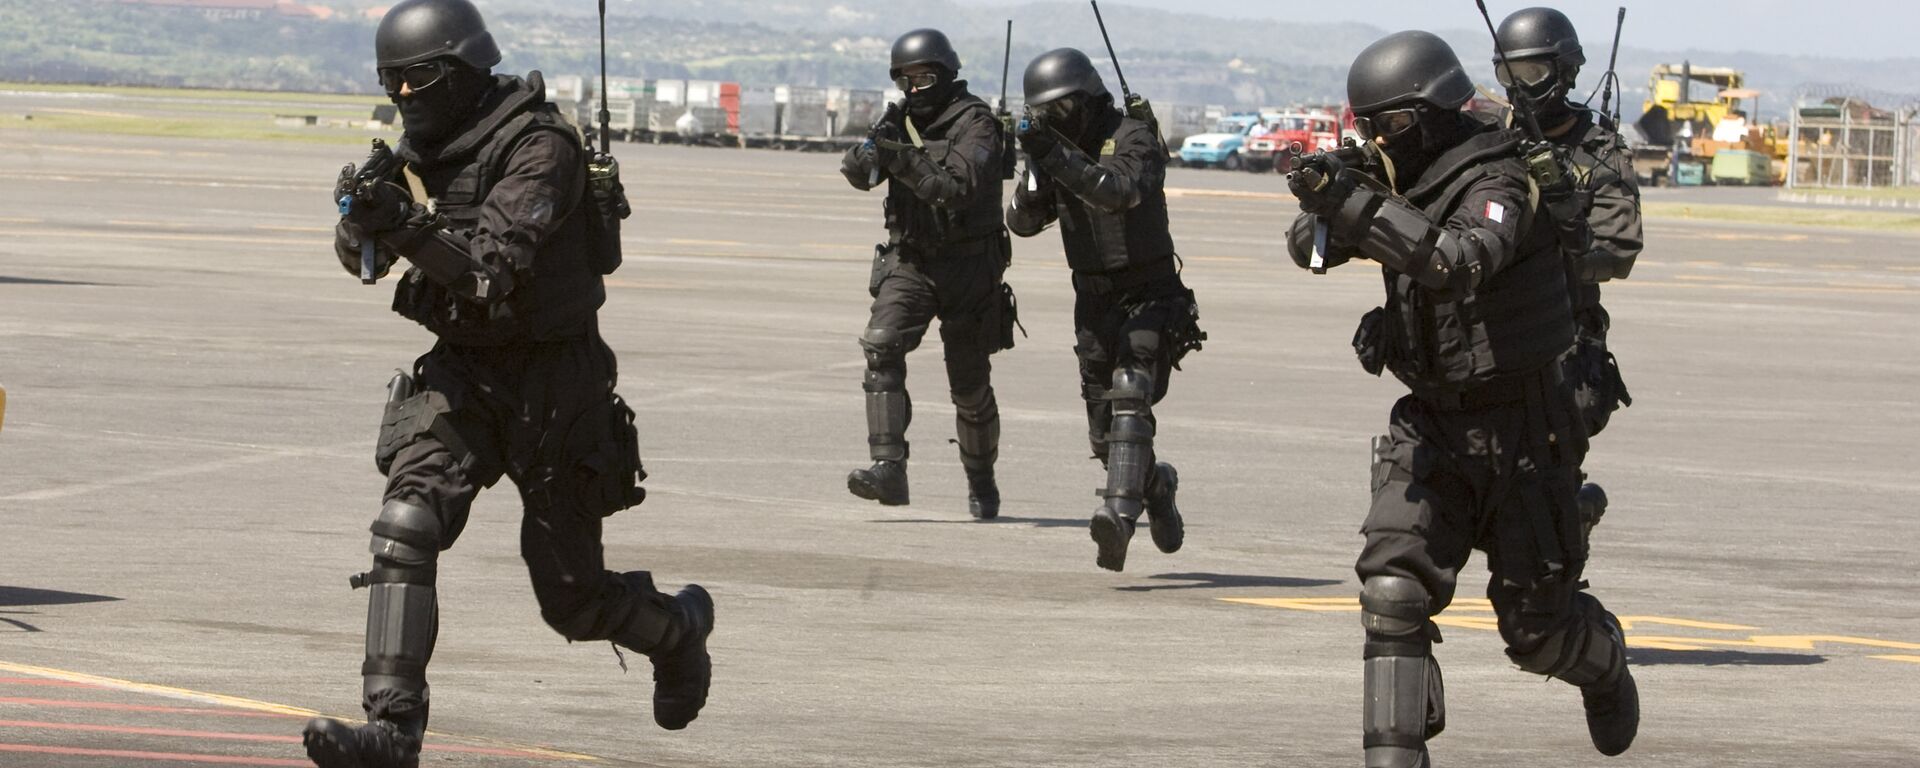 Indonesian Special Forces soldiers, also known as Kopassus, take position during a joint anti-terrorism exercise with Australia's elite unit SAS at the Bali International Airport, in Kuta, Indonesia on Tuesday, Sept. 28, 2010 - Sputnik International, 1920, 06.03.2022